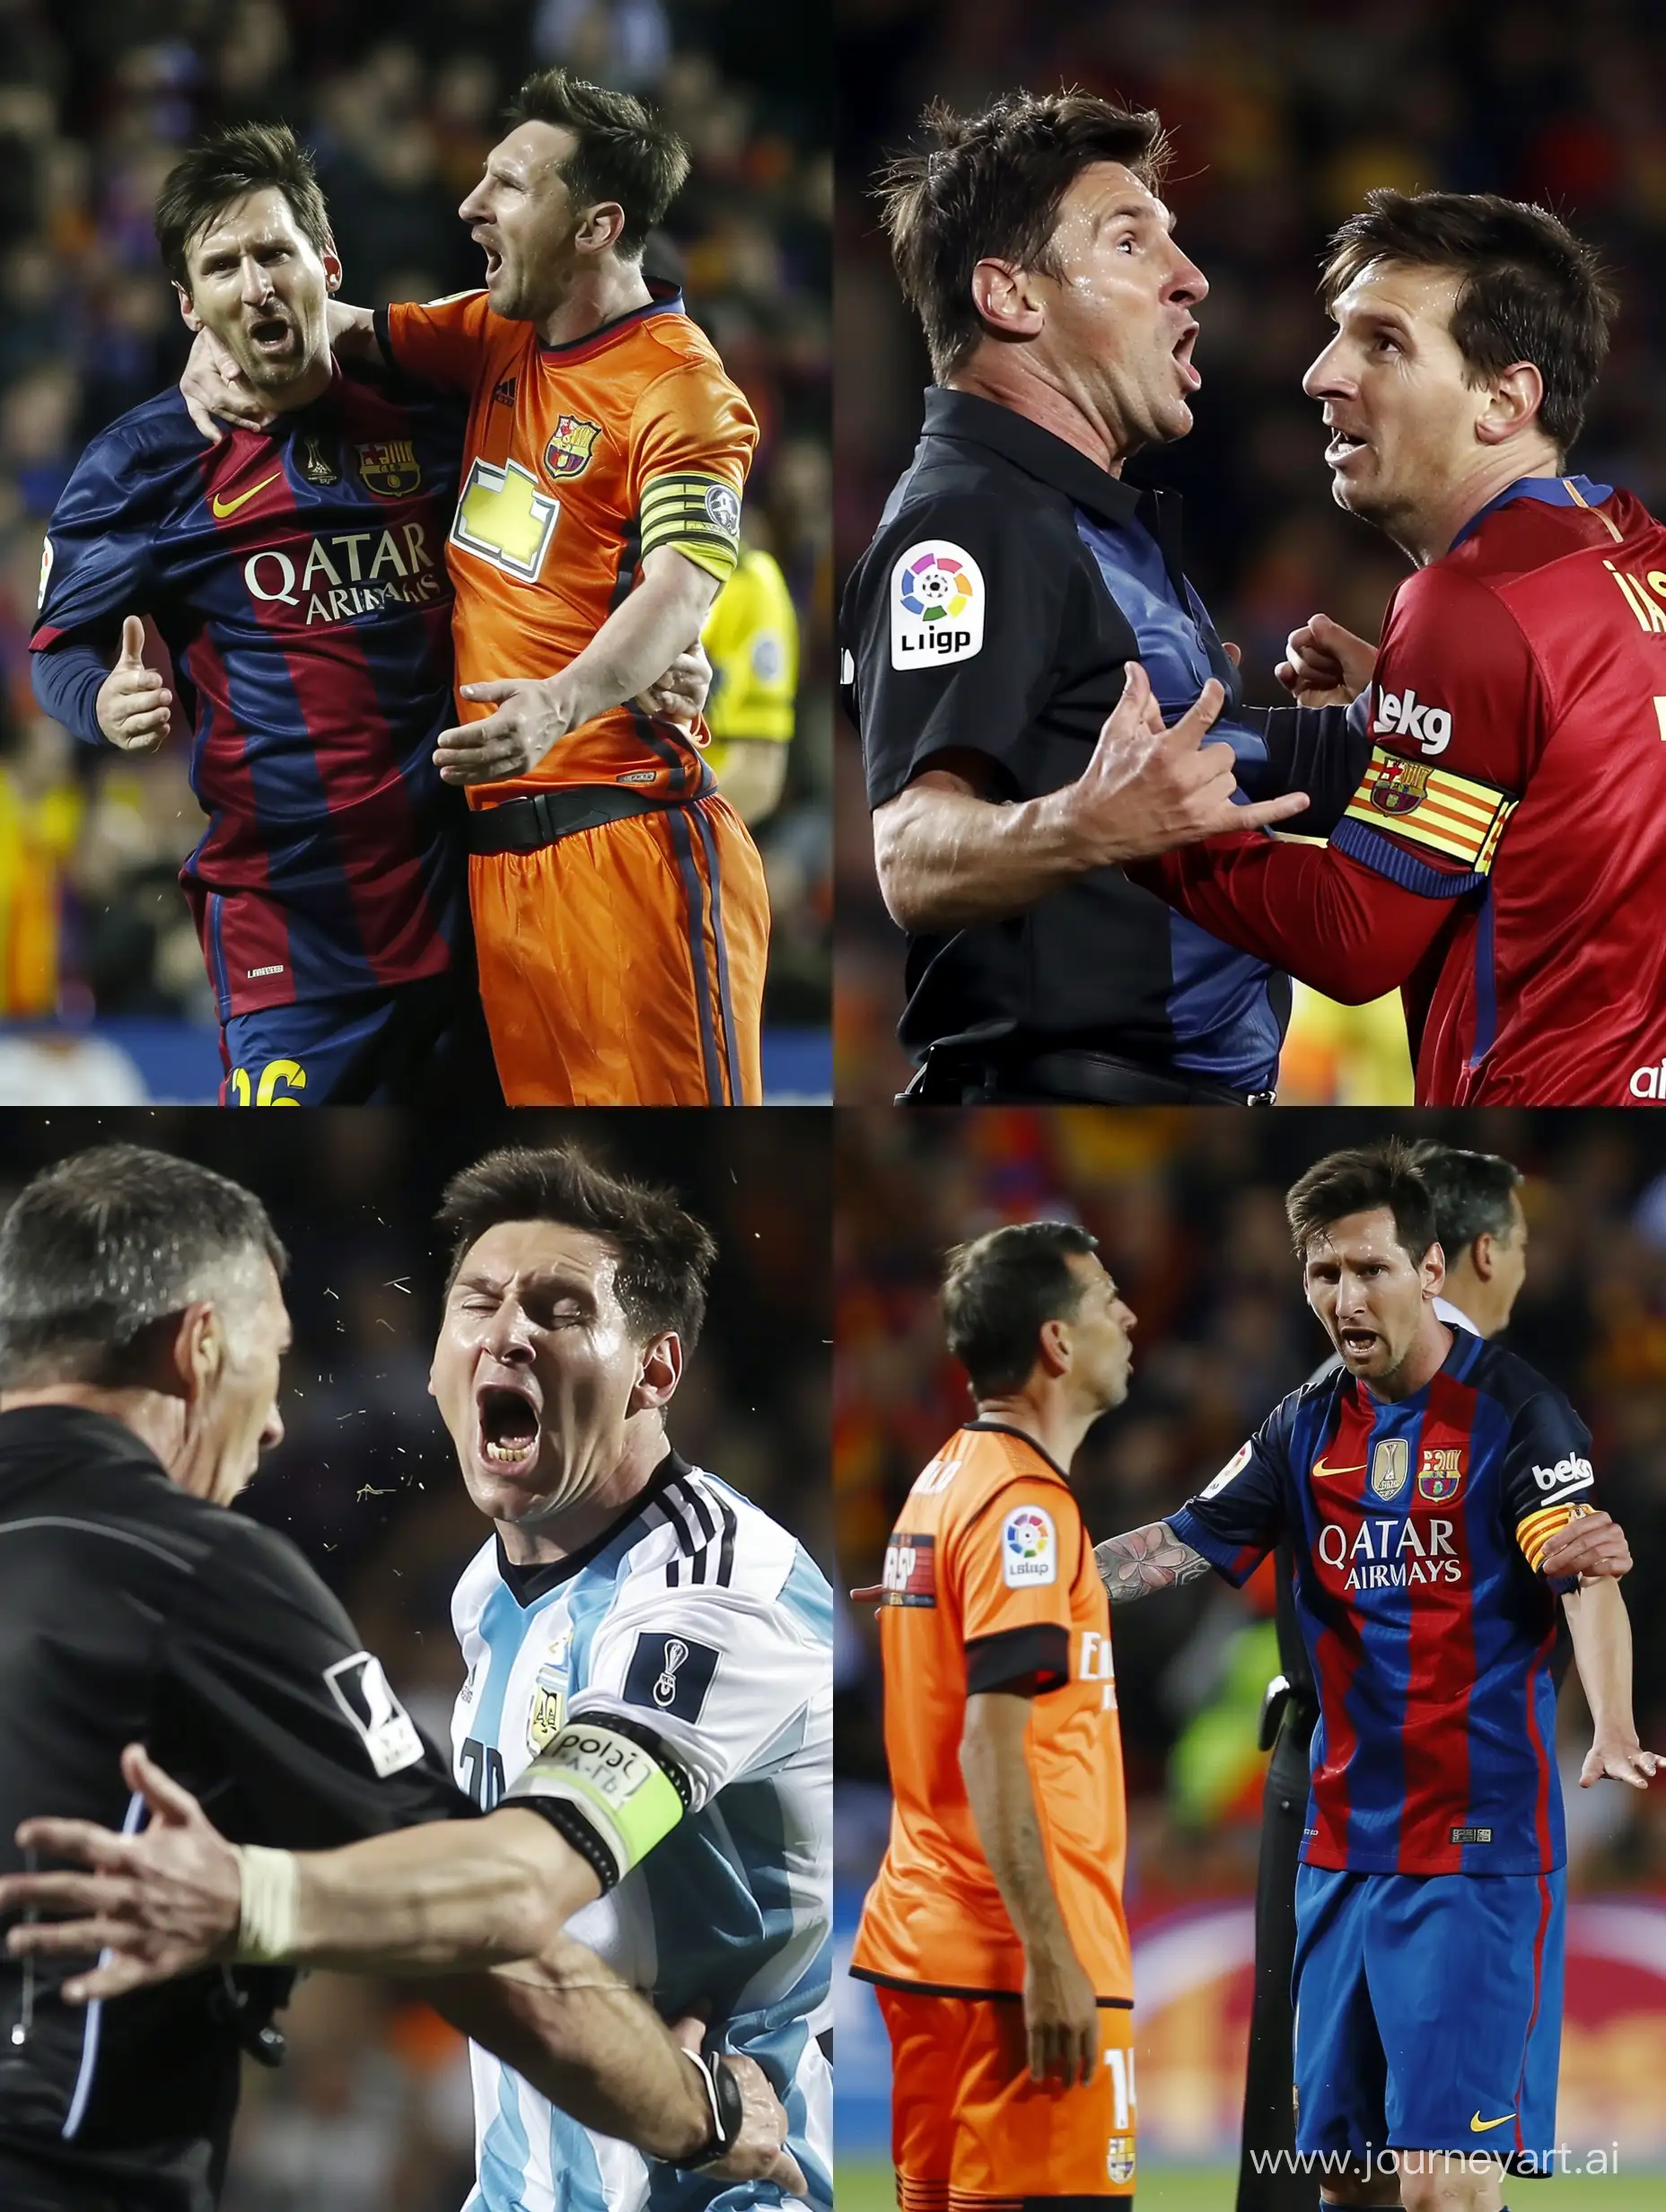 Lionel-Messi-Controversially-Challenges-Referee-in-Match